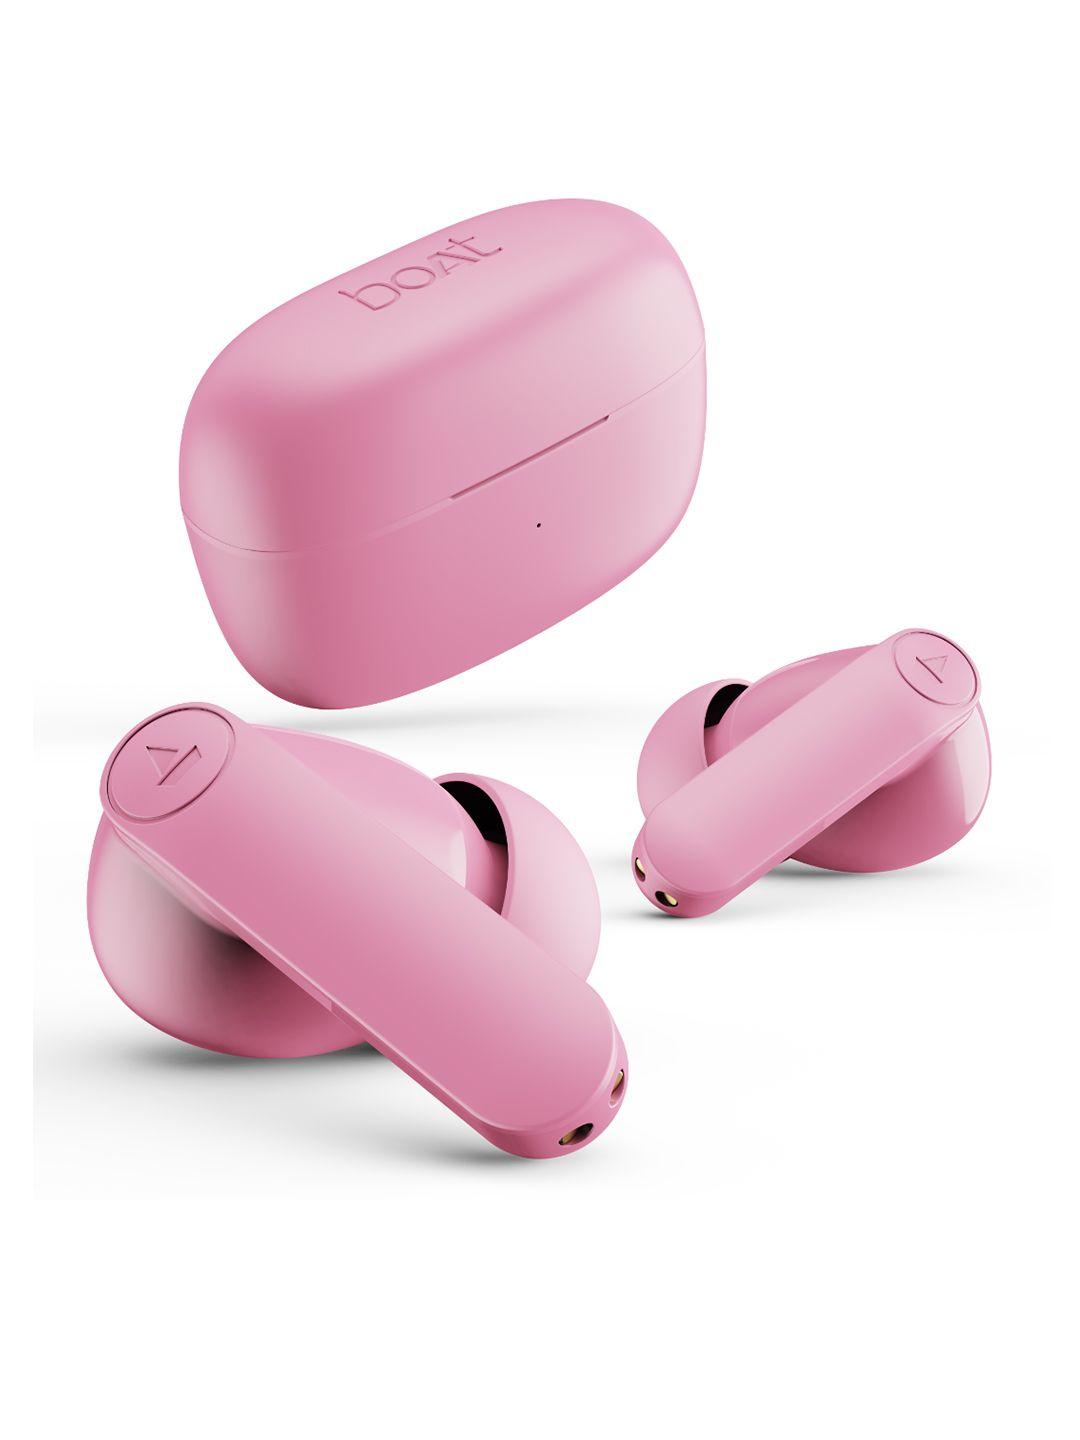 boat airdopes 131 pro m with quad mic enx bluetooth earbuds - pink